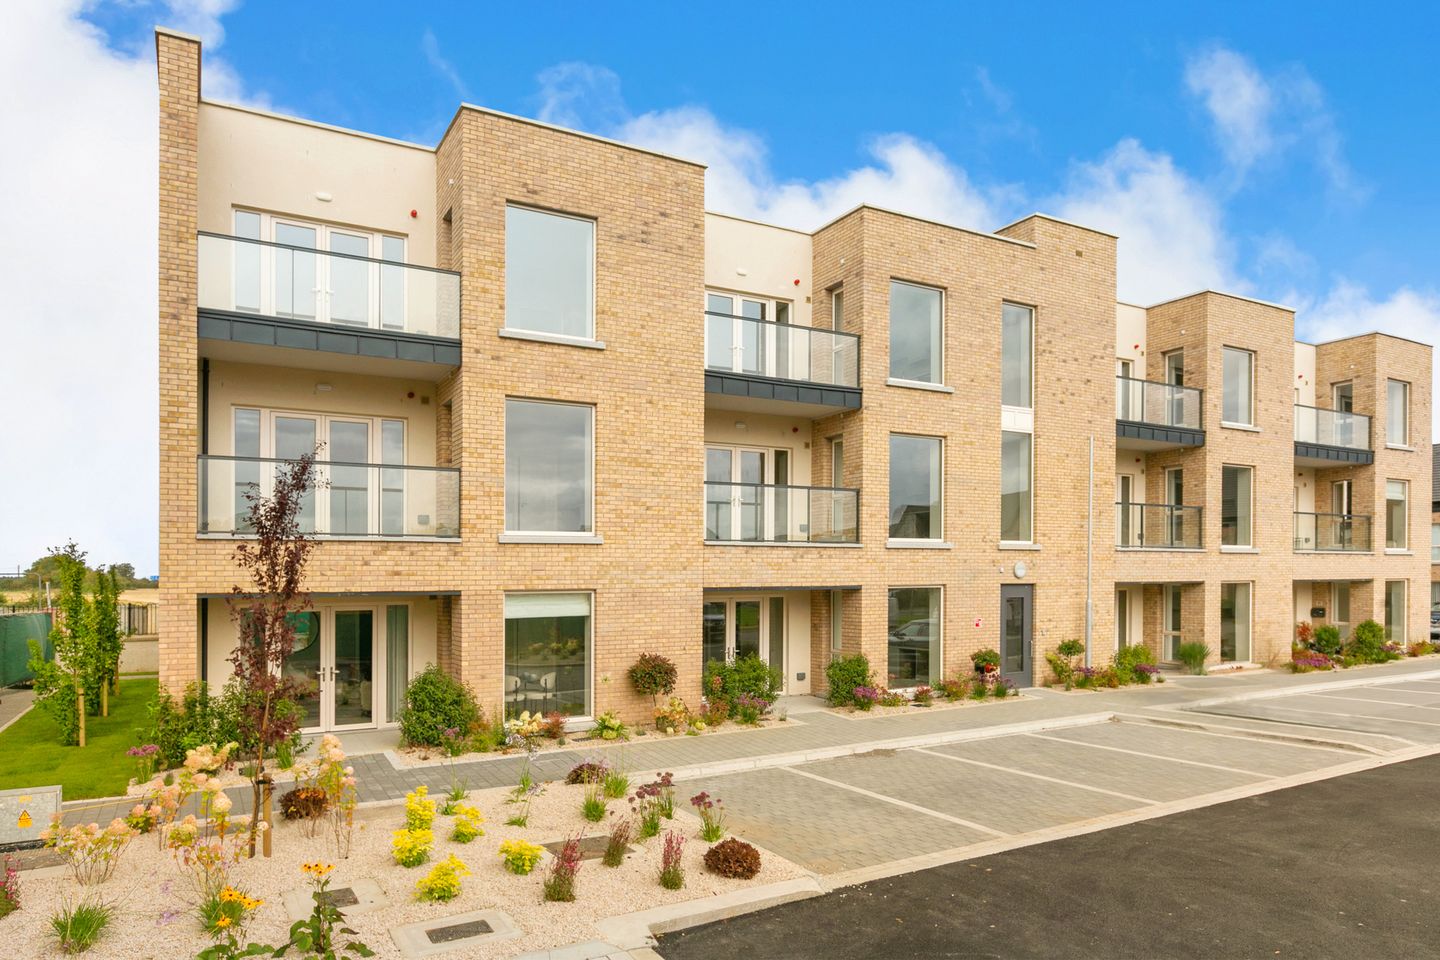 1 Bed Apartments, The Paddocks, 1 Bed Apartments, The Paddocks, Castle Farm, Dunboyne, Co. Meath